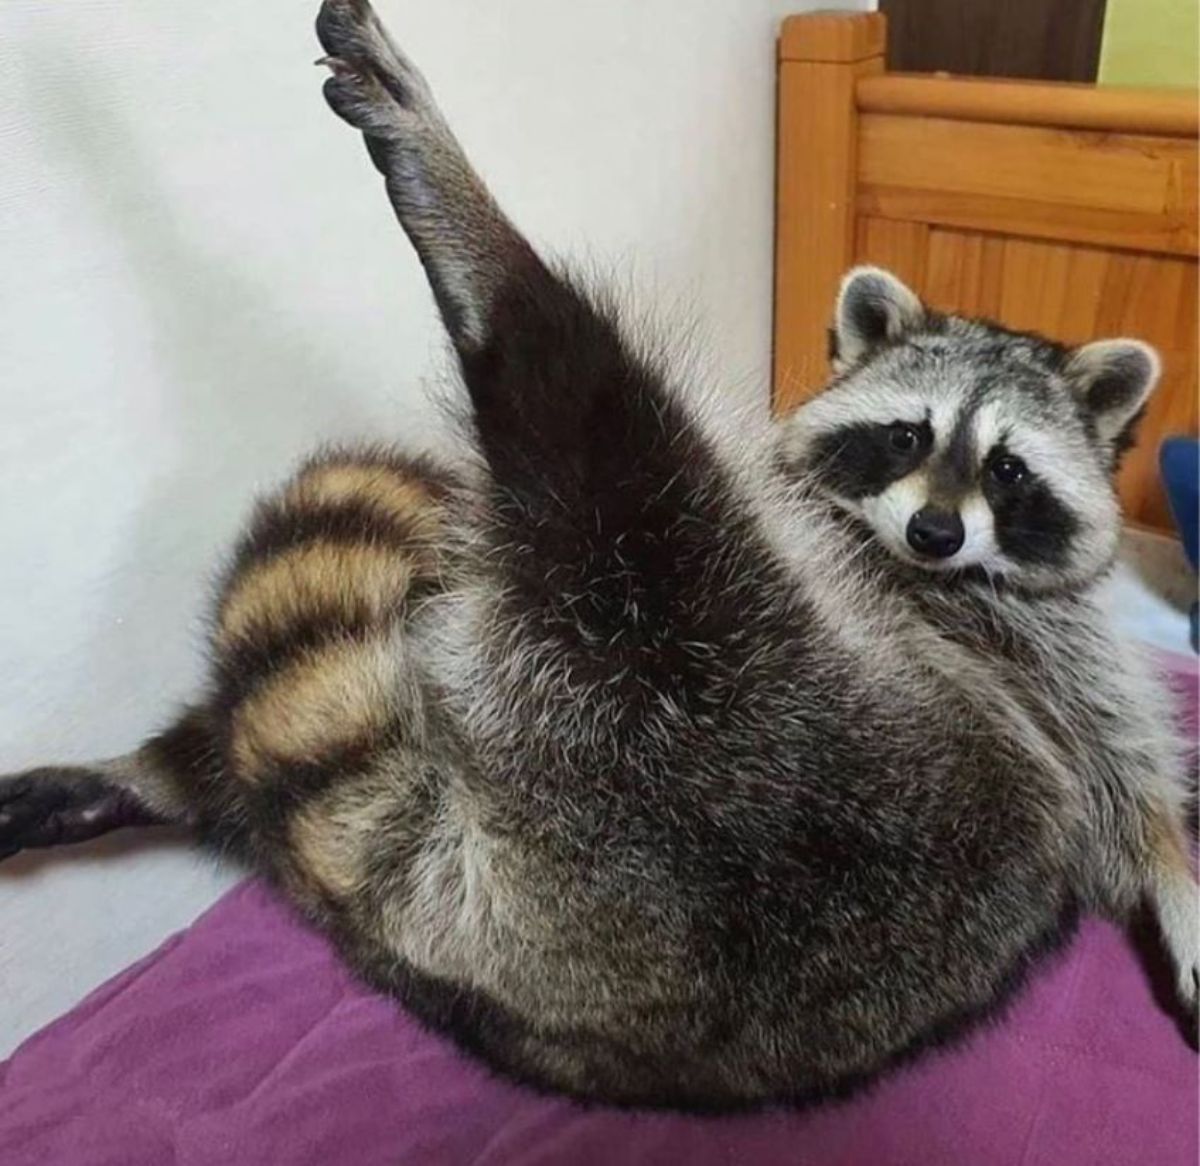 raccoon laying on a purple blanket with one back leg extended straight out